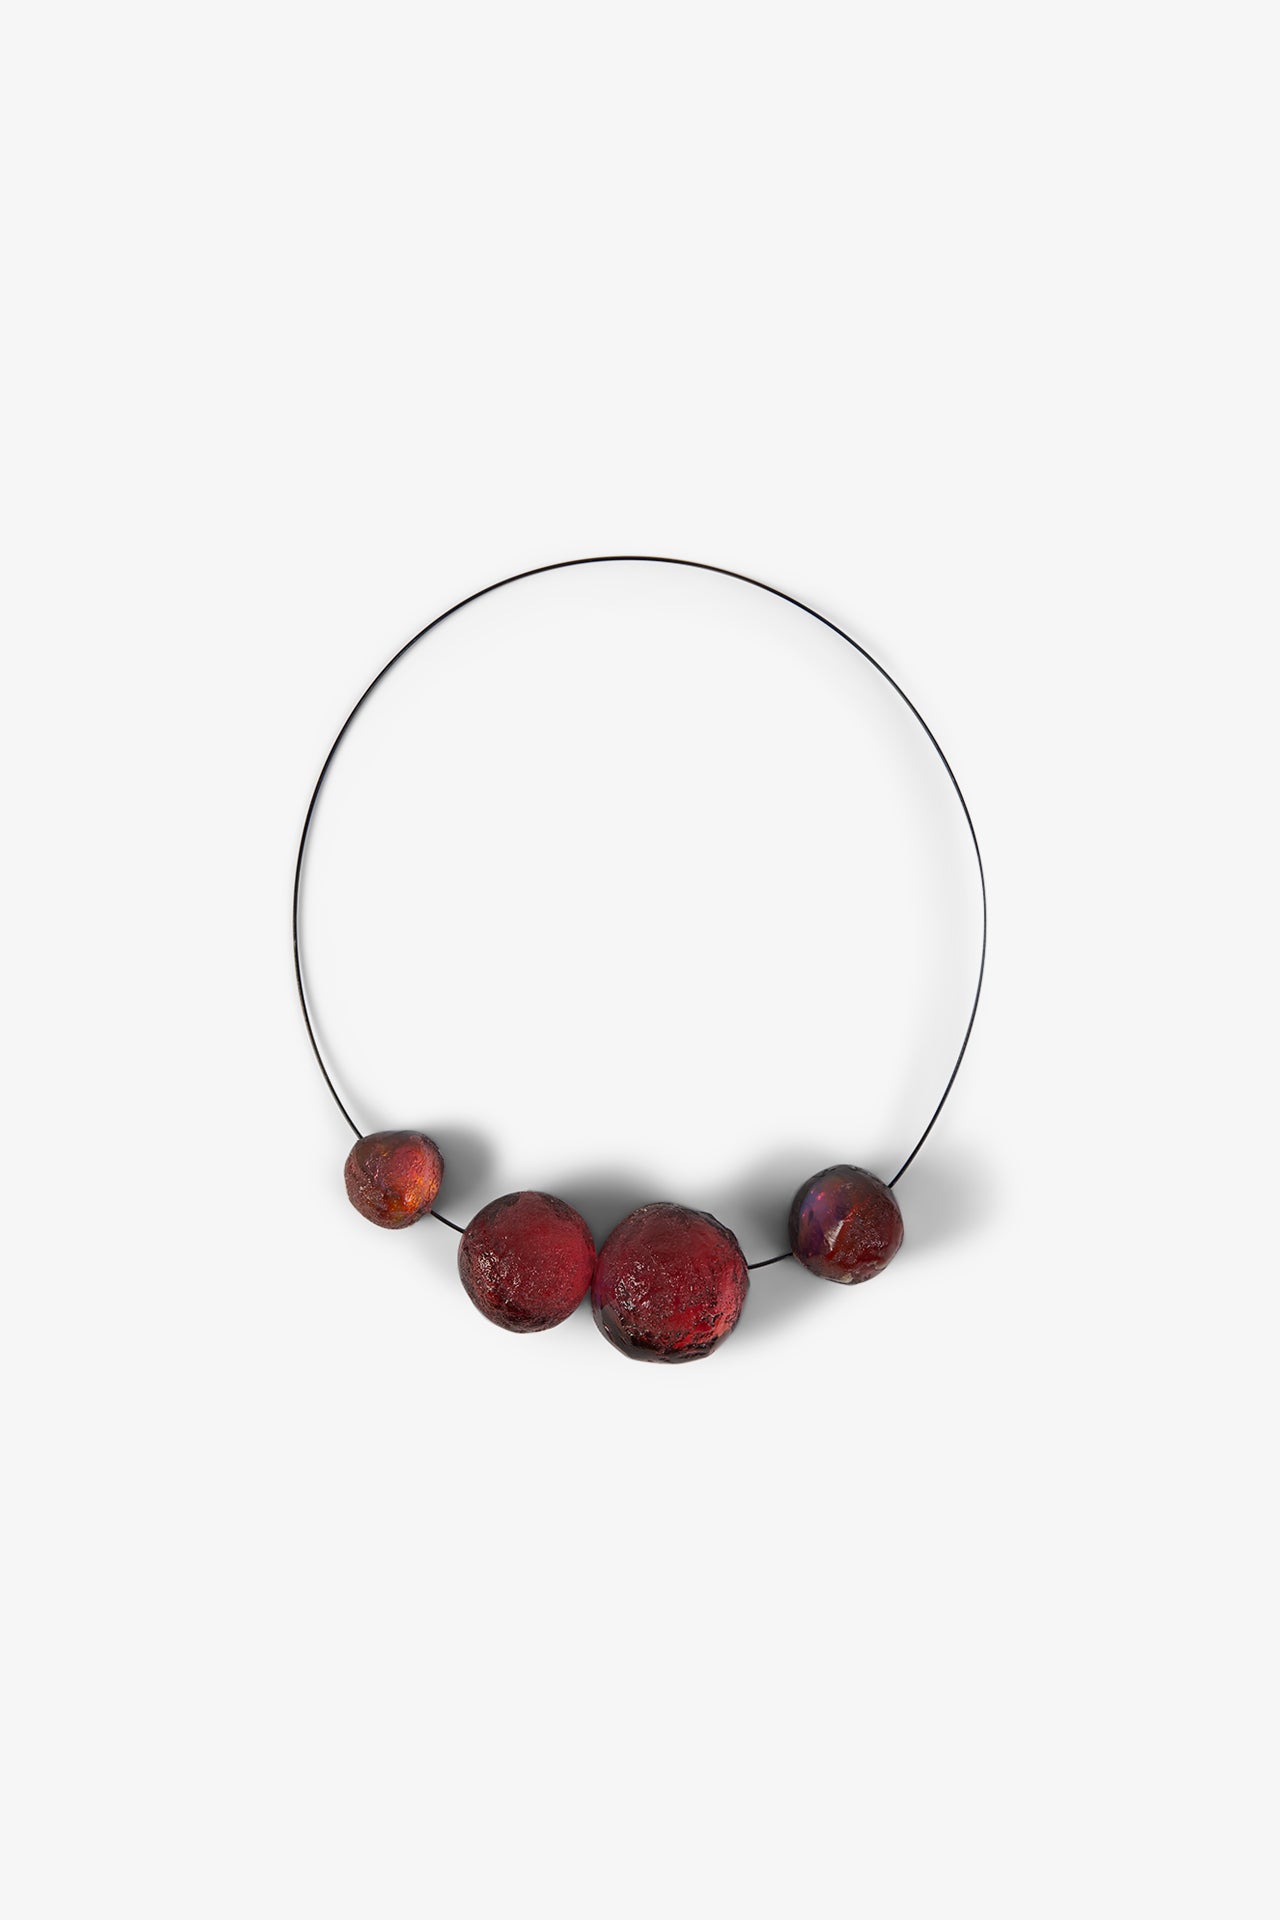 Collier 4 boules Roses Orangées - Marianne Olry